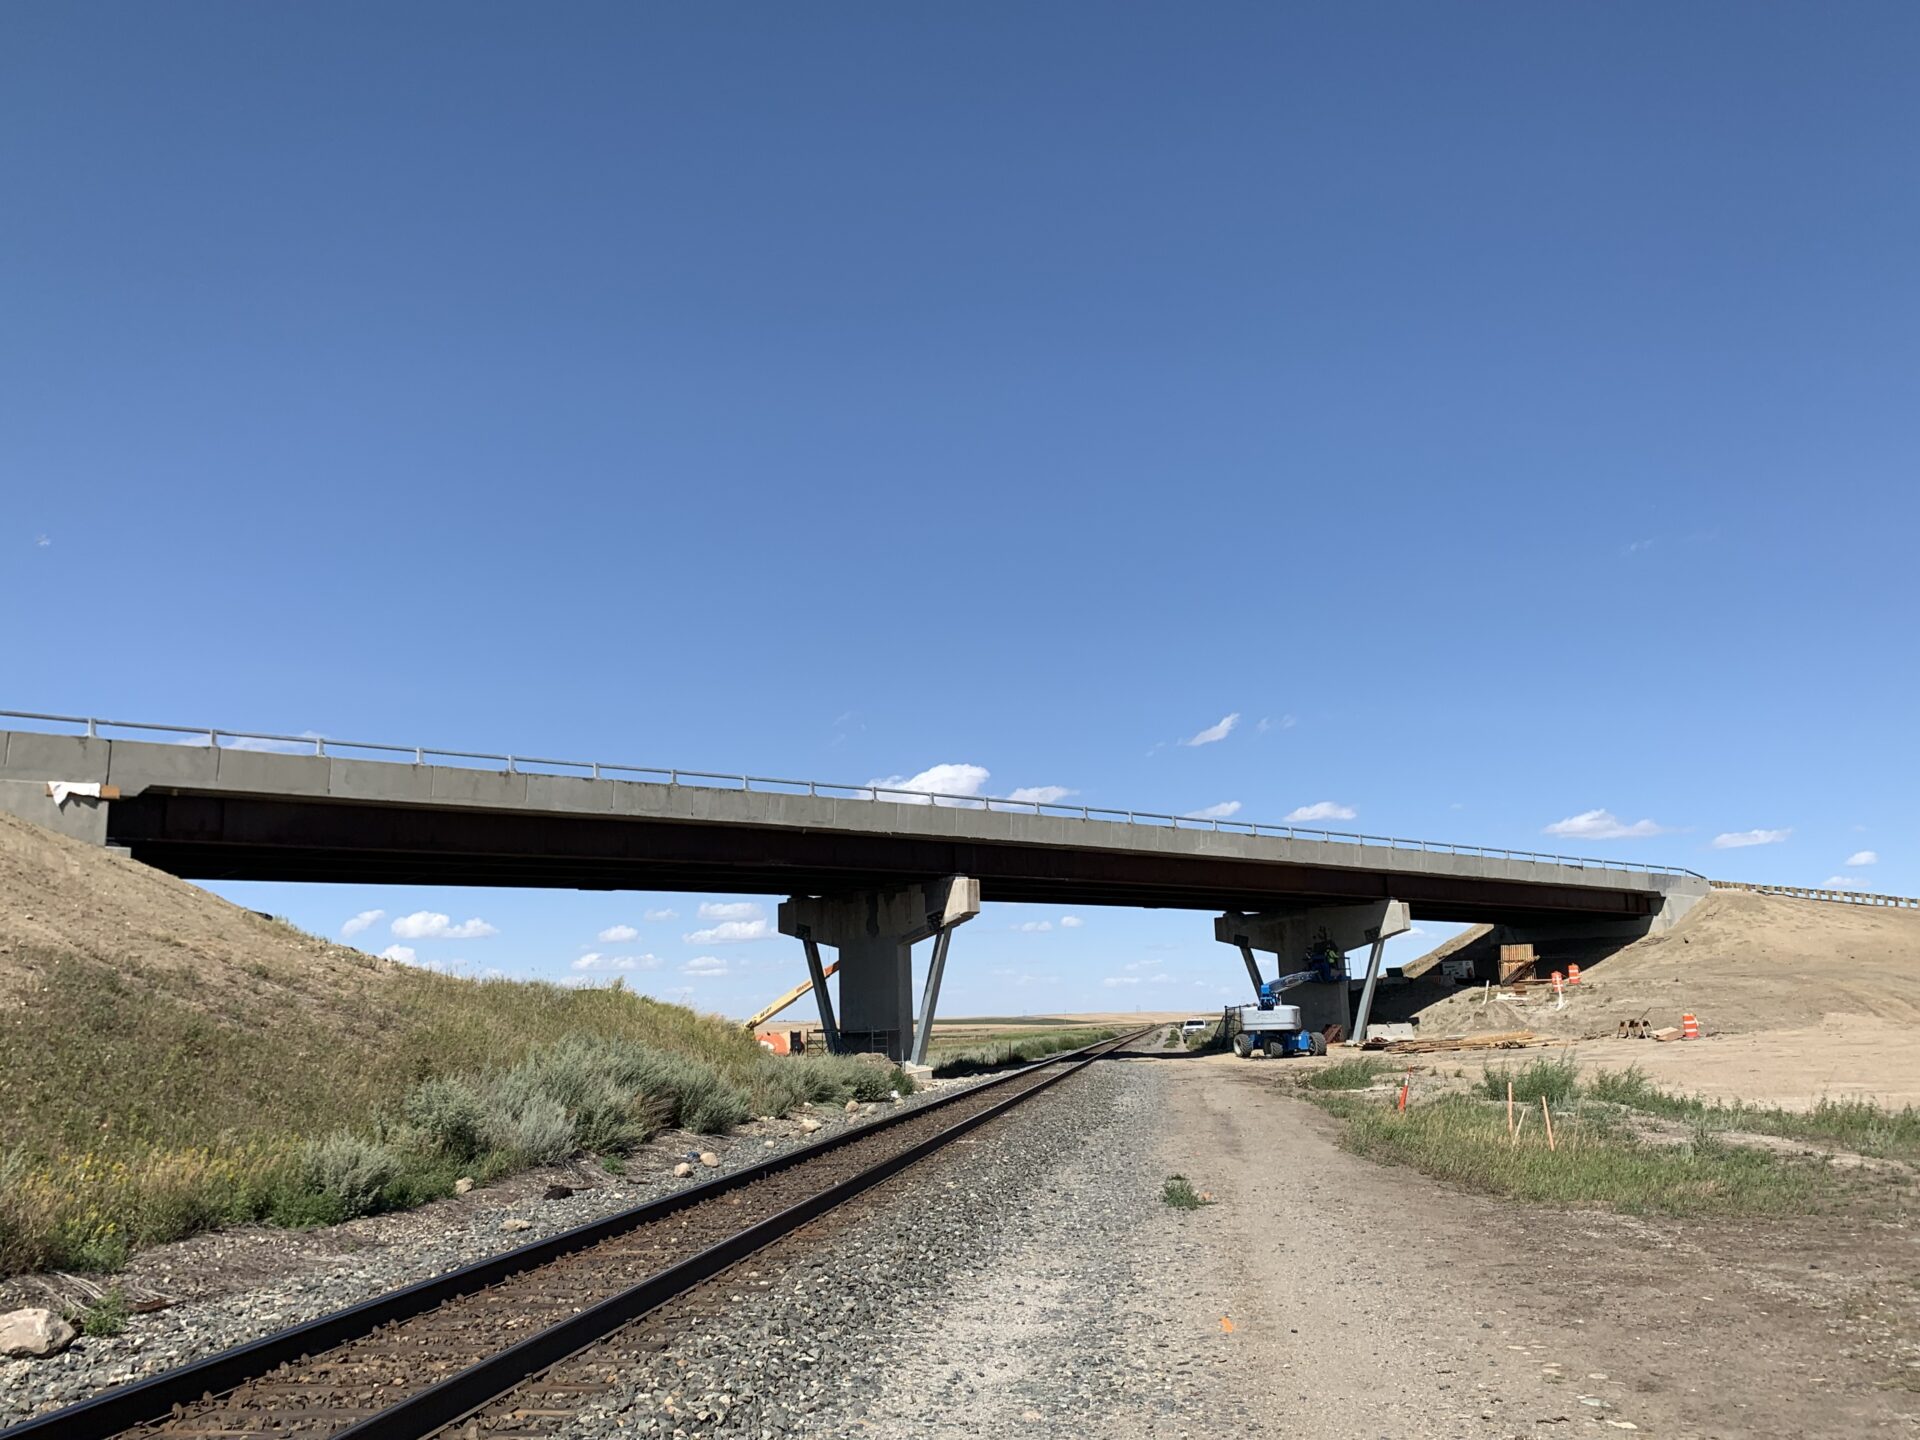 Construction of Two Overpasses on Highway 1